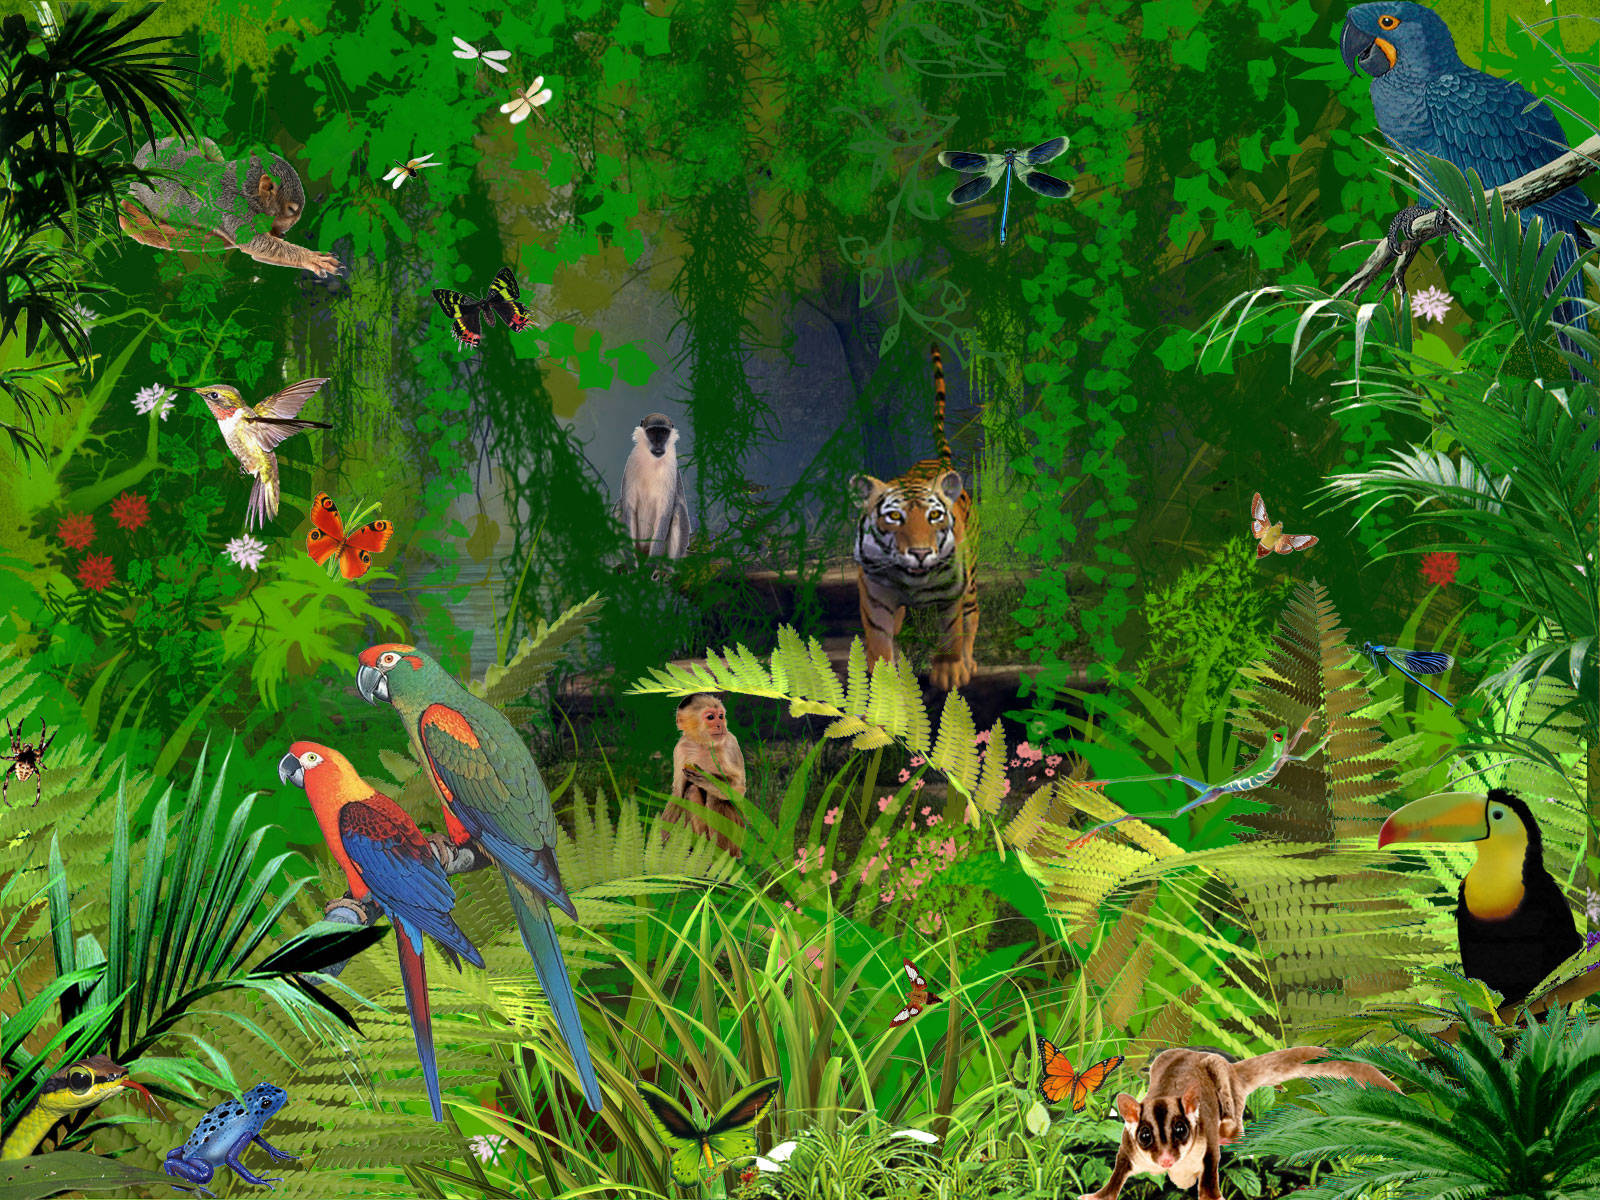 Green Forest With Forest Animals Digital Art Wallpaper